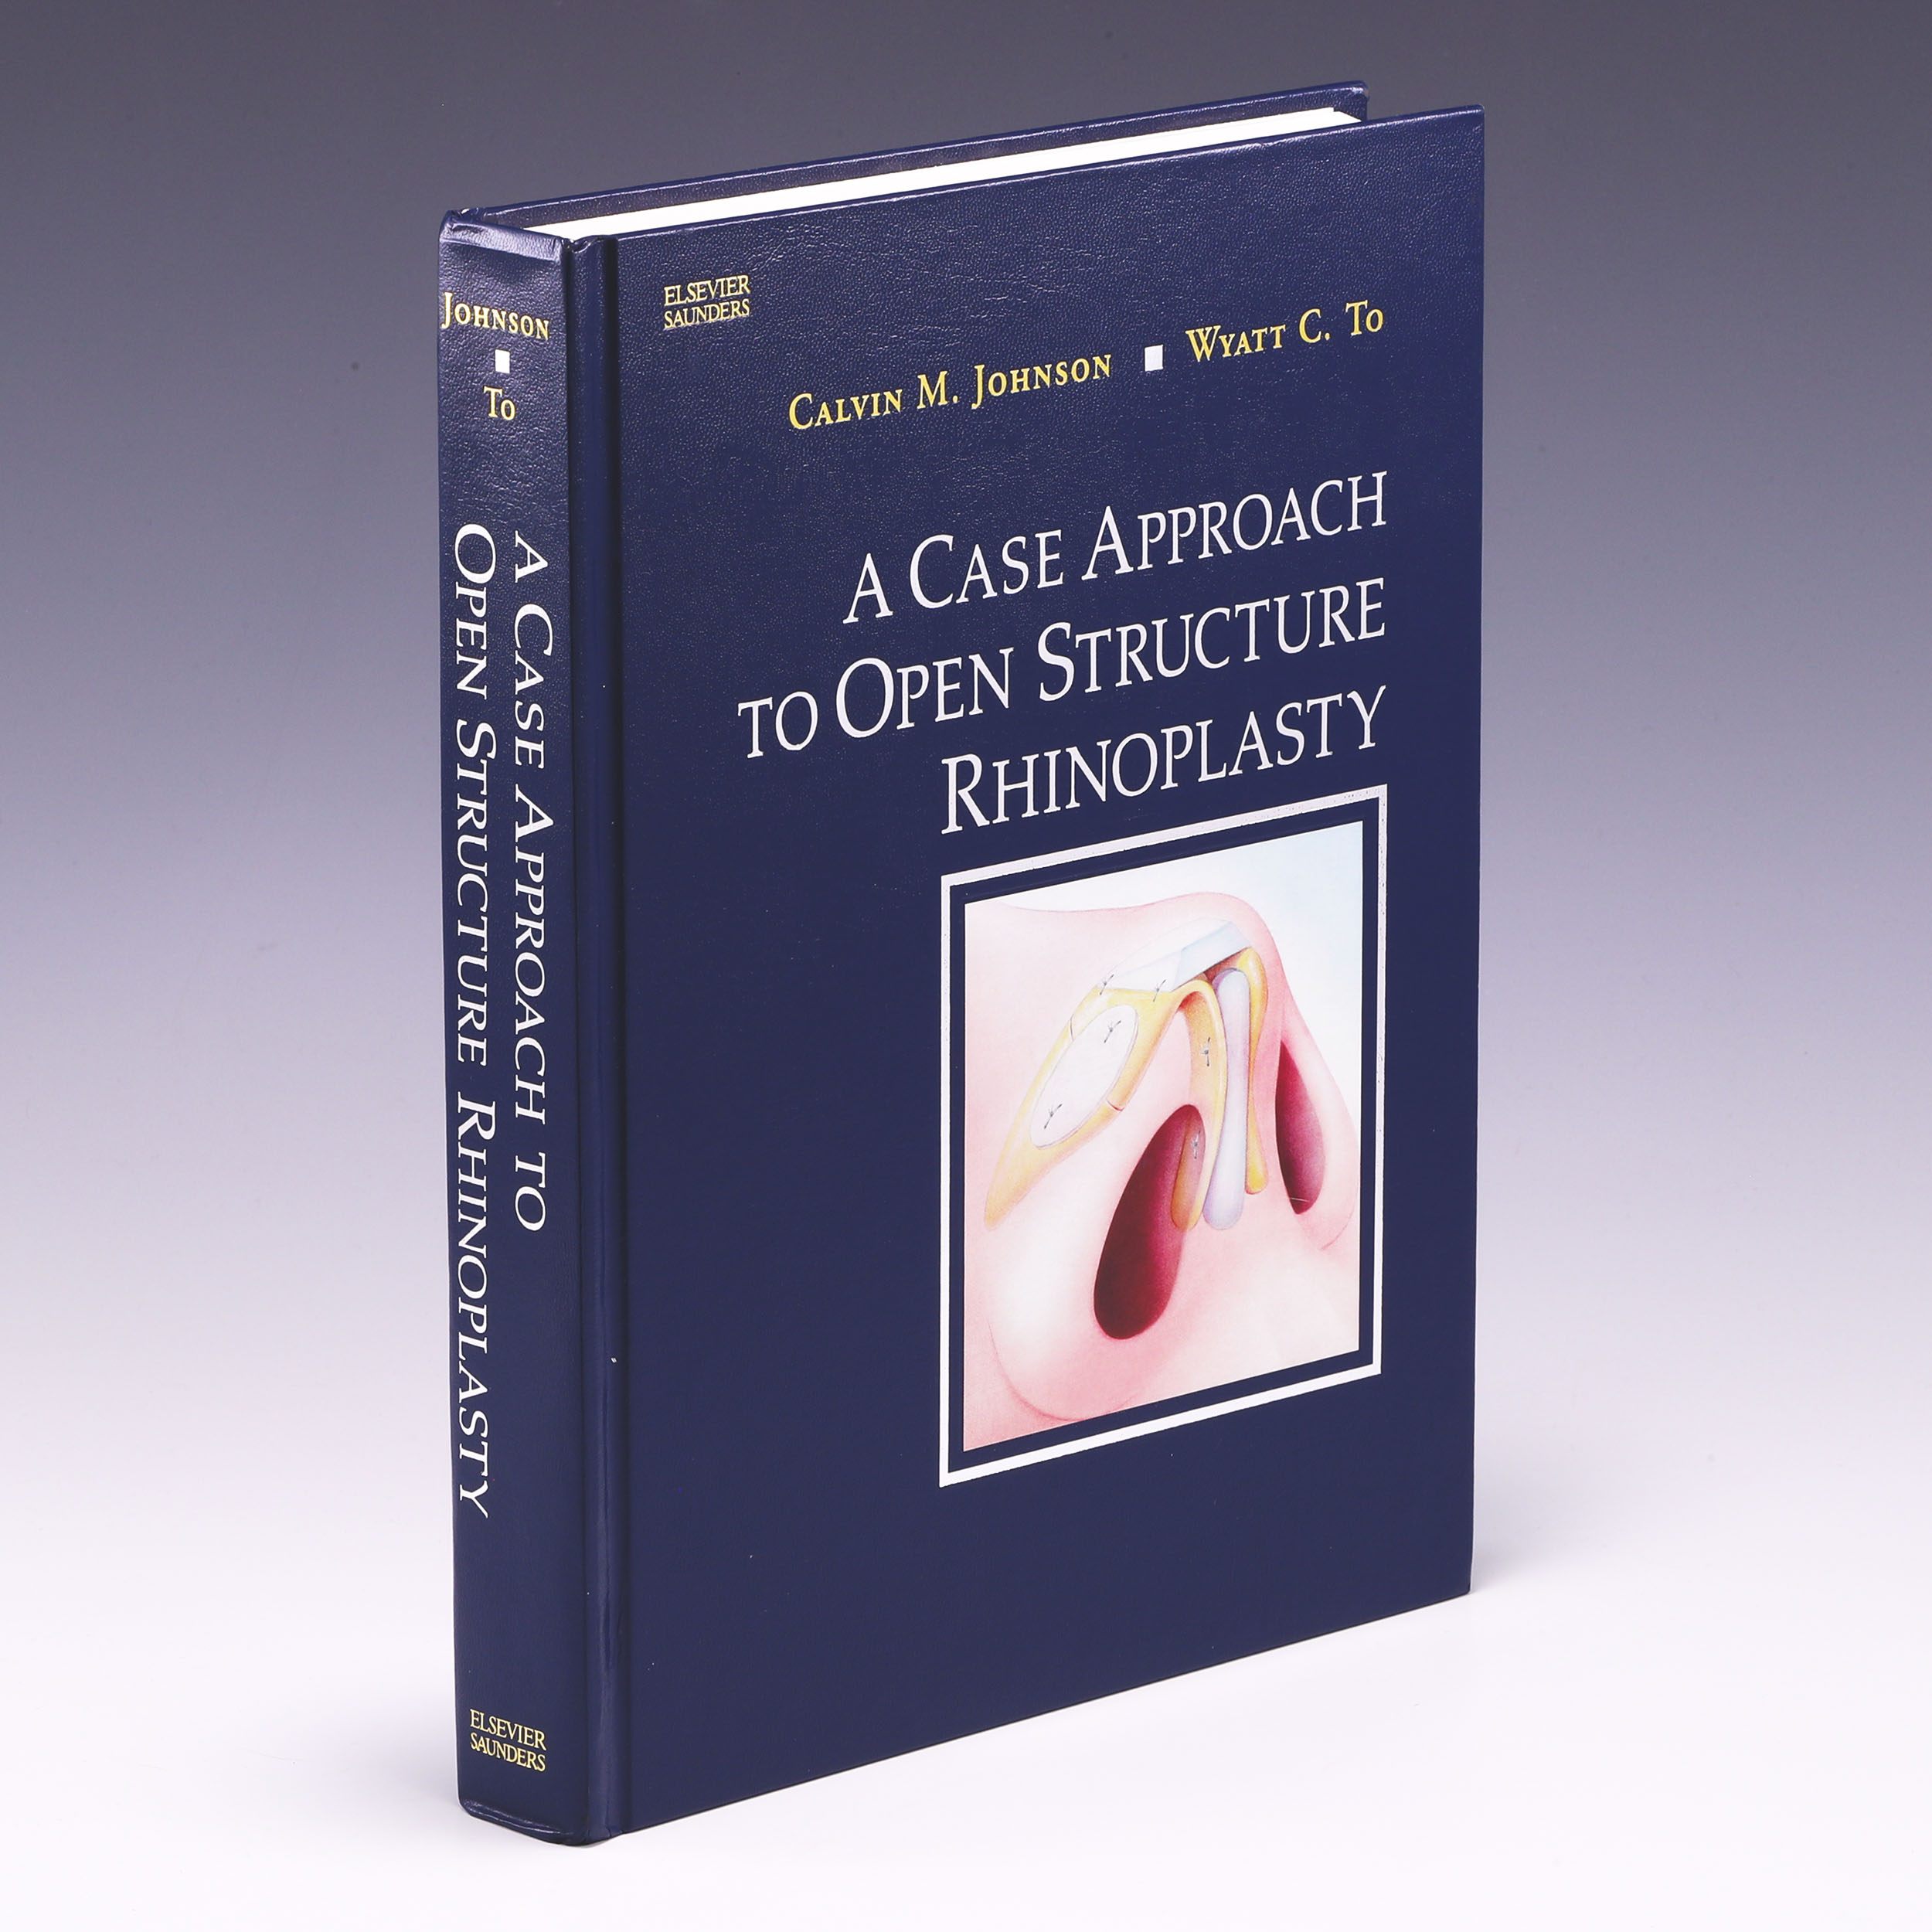 A Case Approach to Open Structure Rhinoplasty - Calvin M. Johnson Jr. MD & Wyatt C. To MD